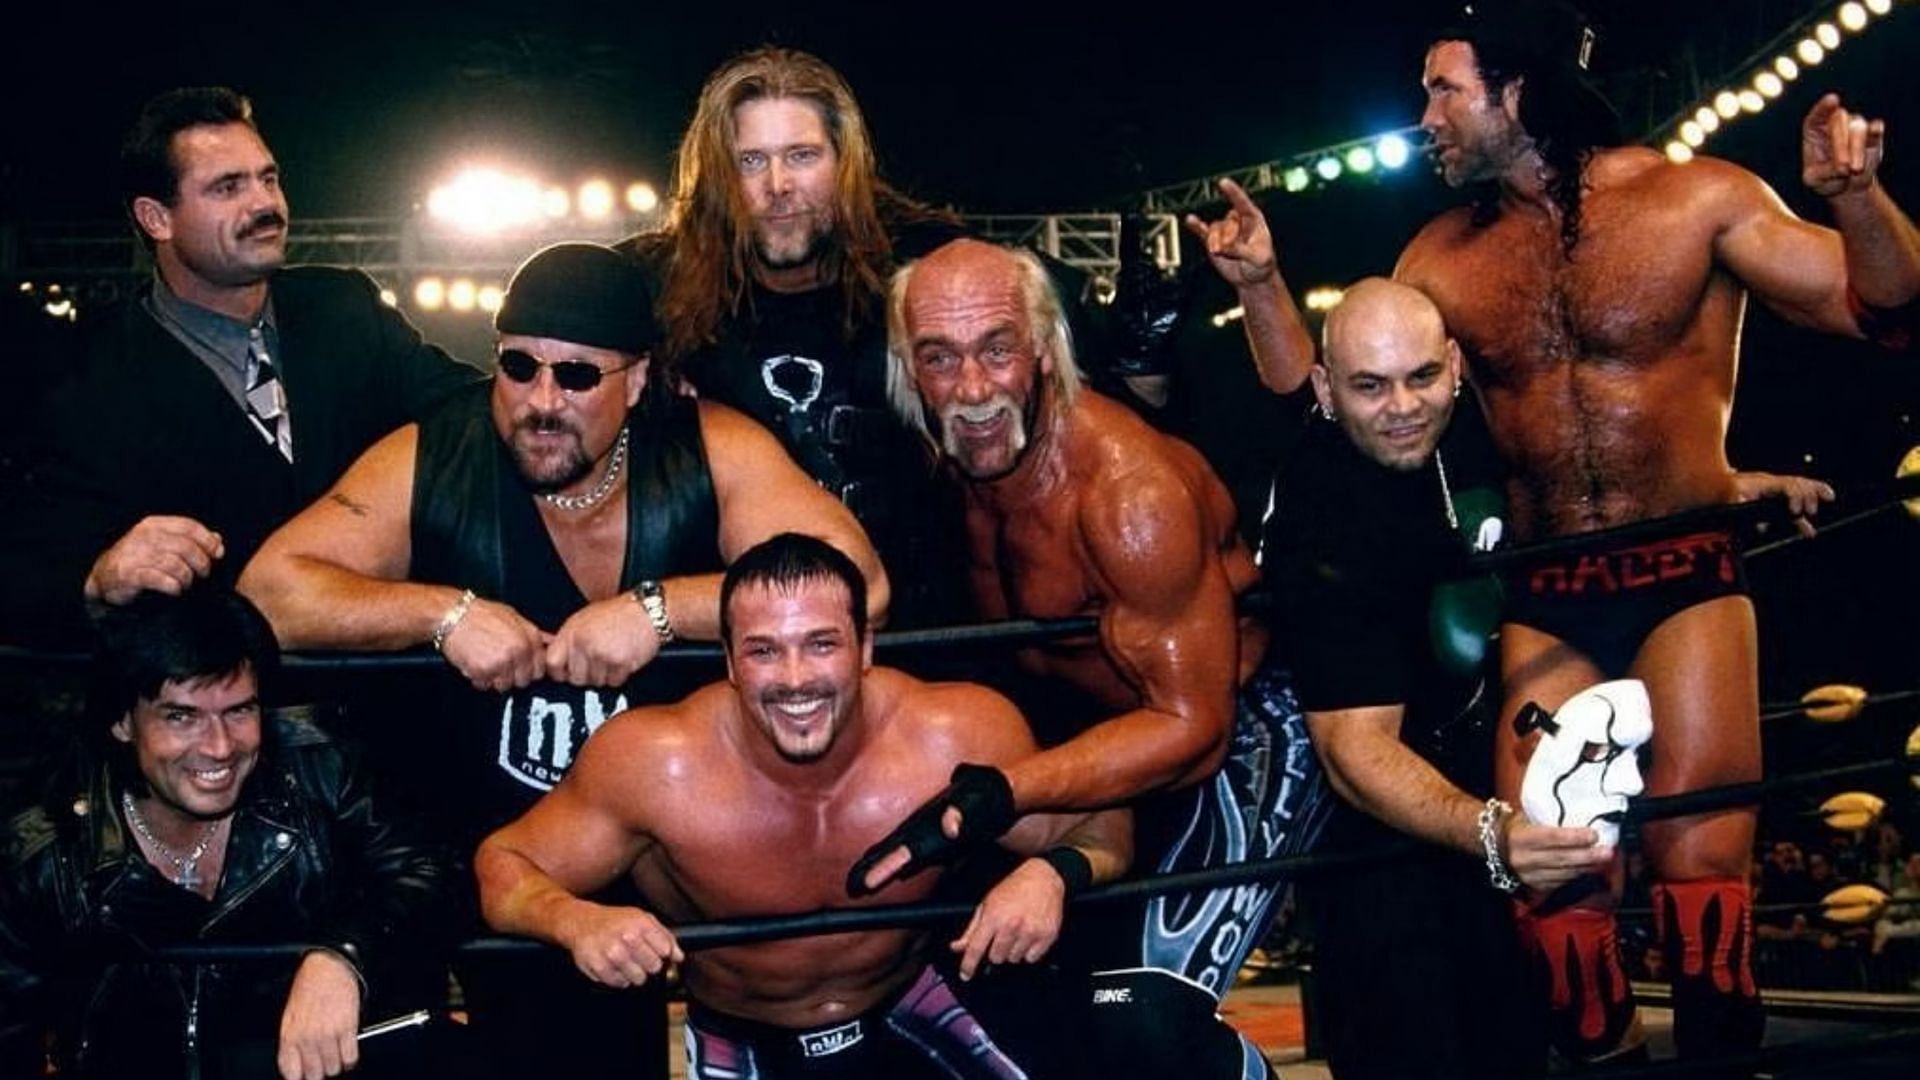 WWE Hall of Famer Kevin Nash was one of the co-founders of the nWo